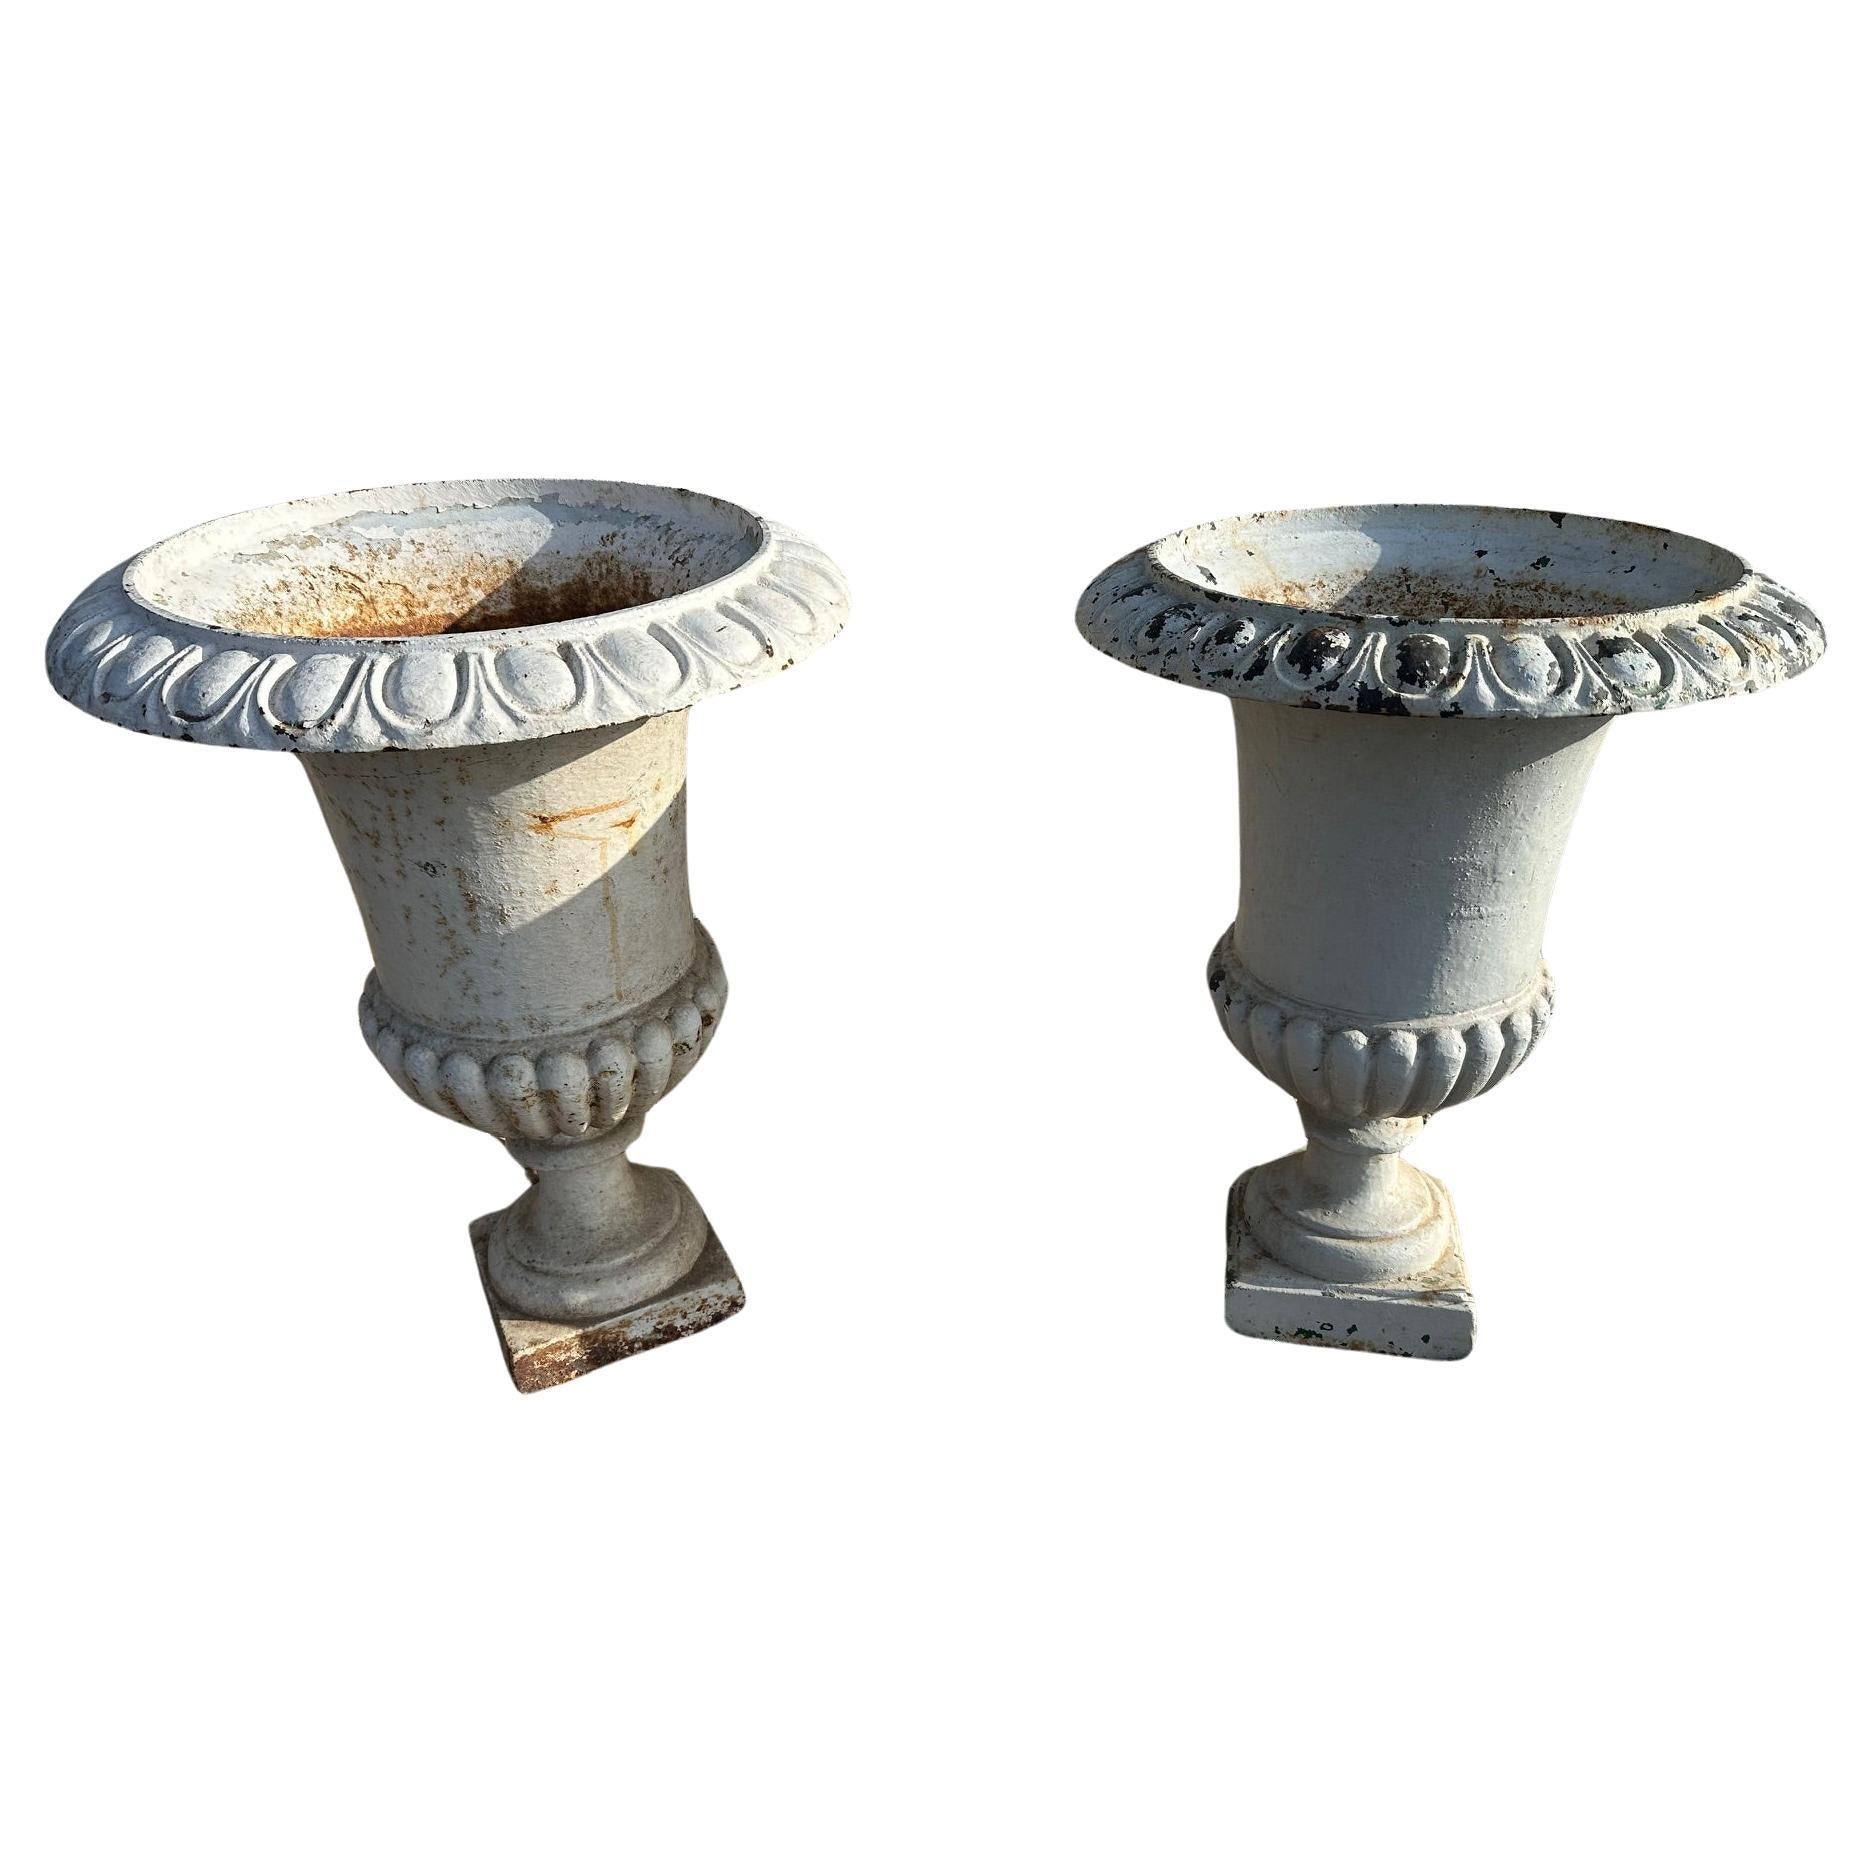 Early 20th century French Cast Iron Medicis Planters, 1900s